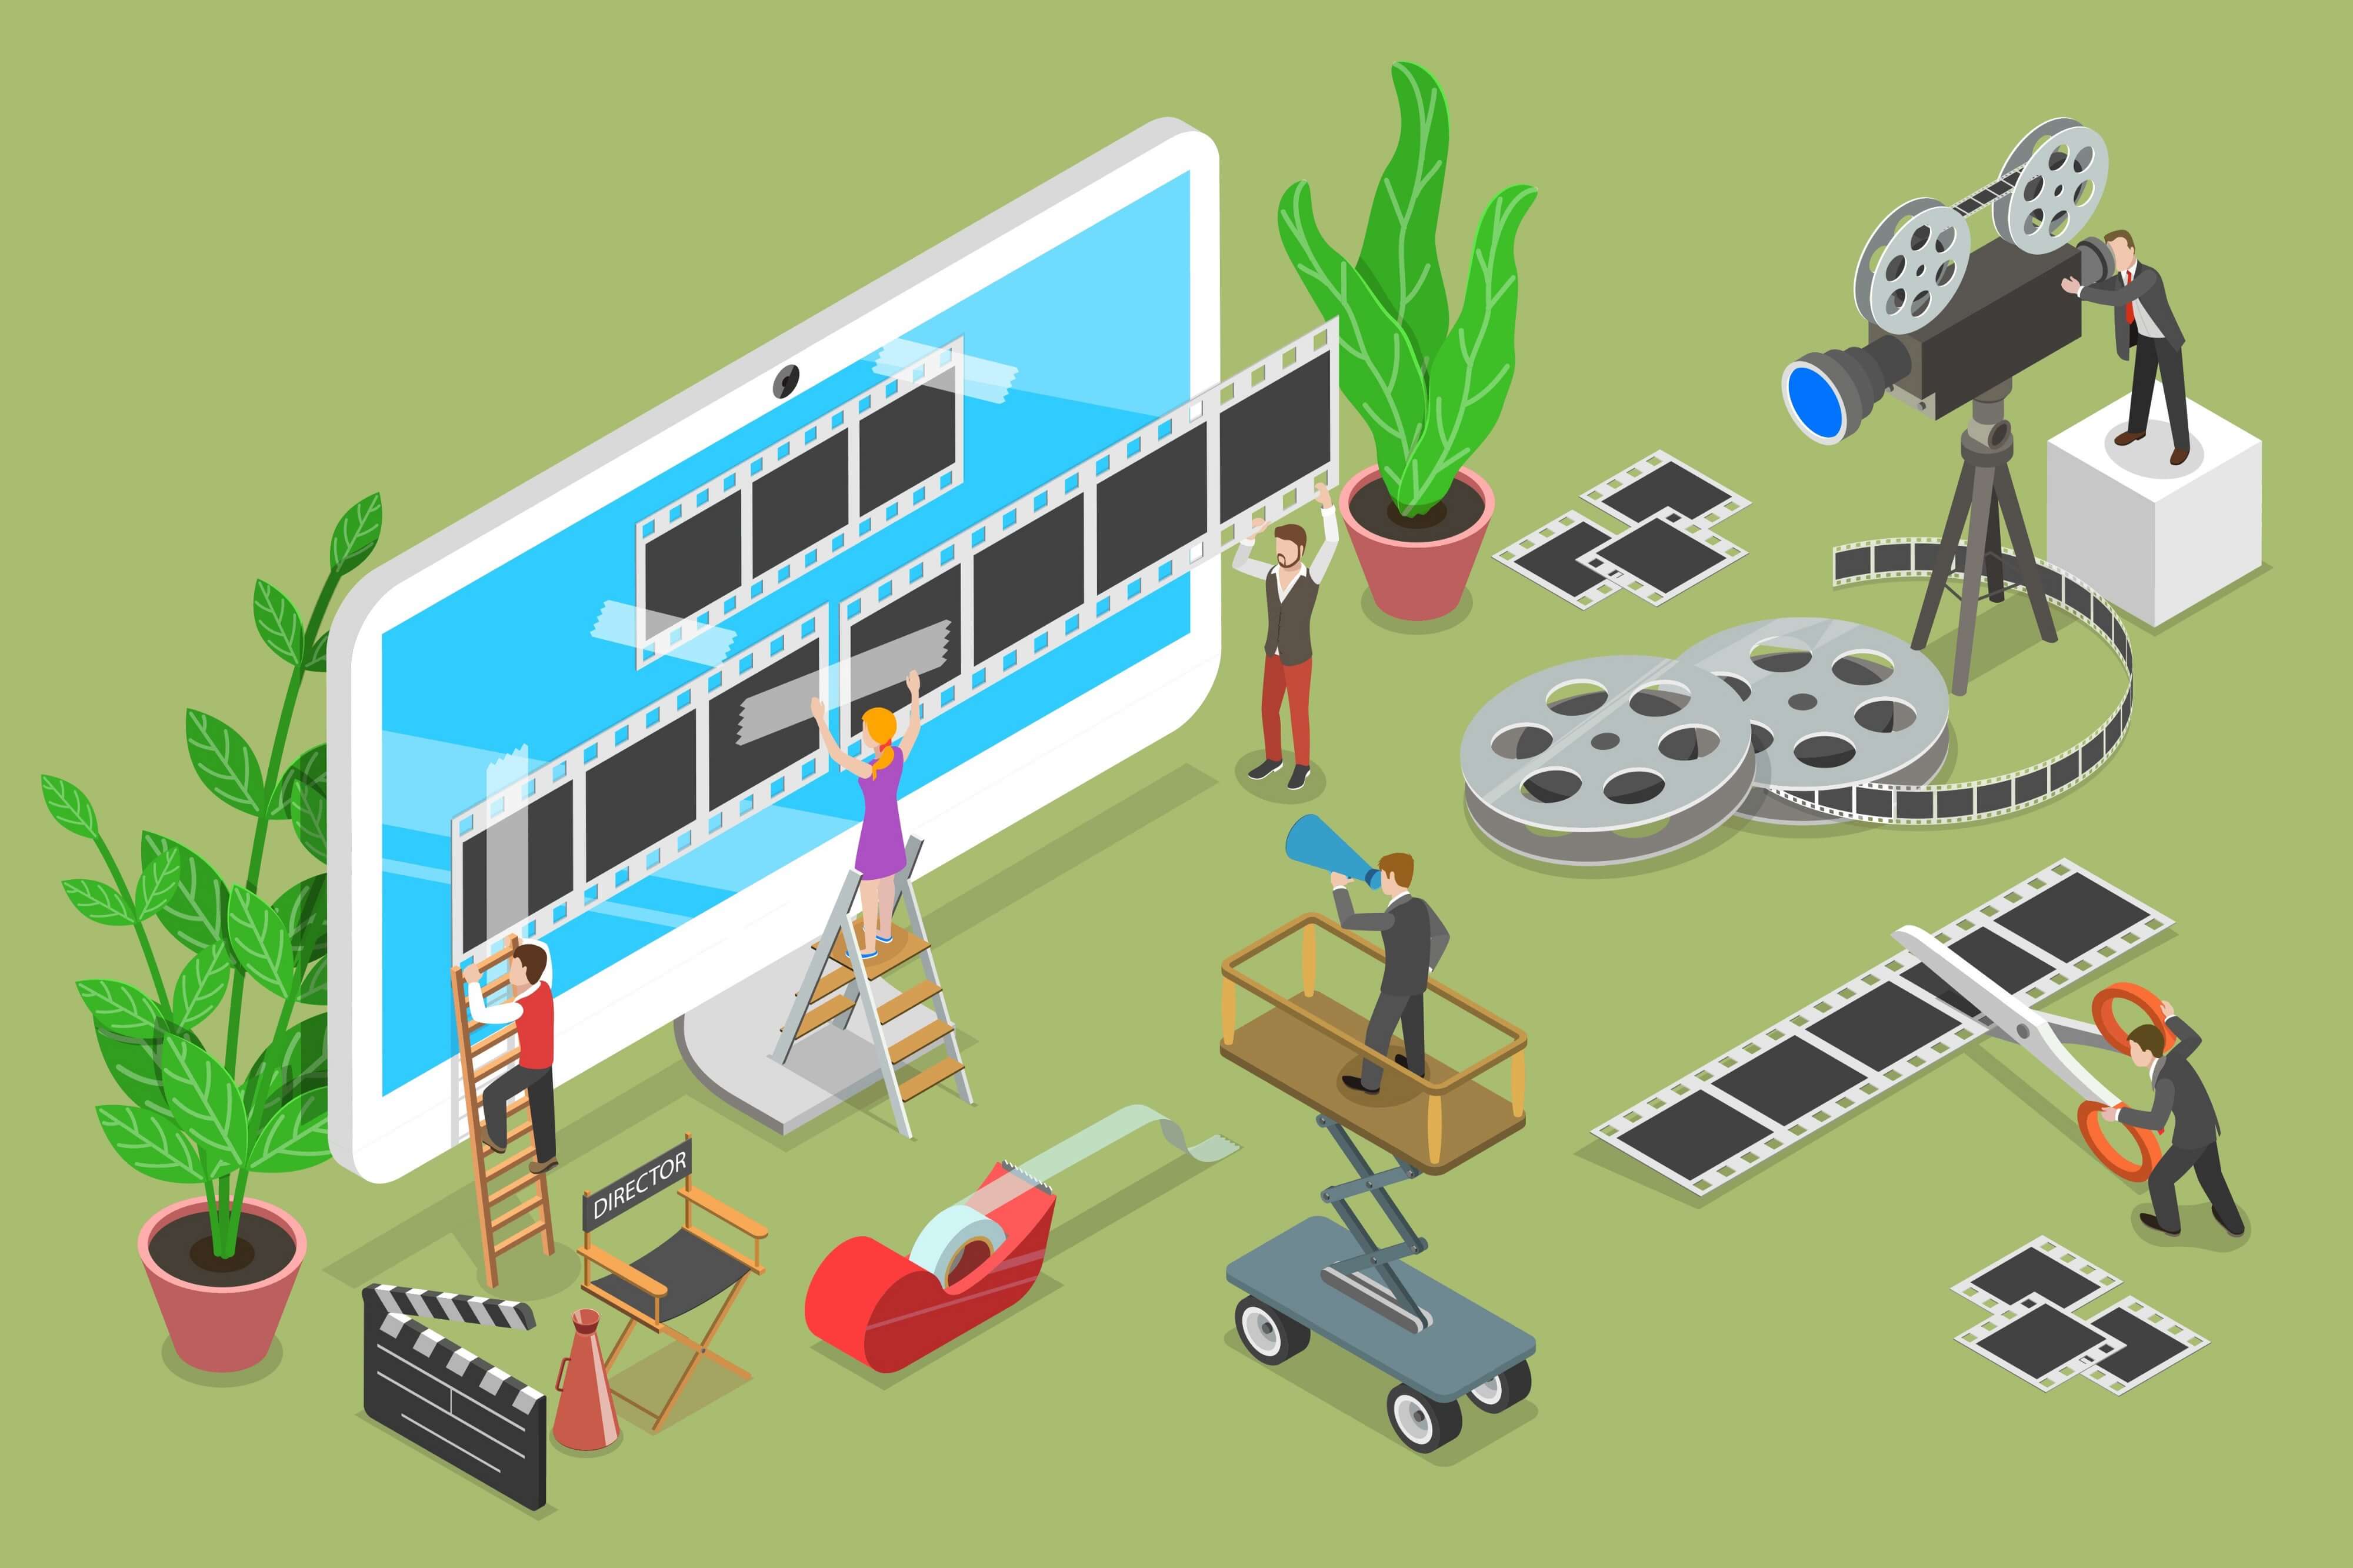 Cartoon image of people designing video for a landscape mobile device — video recording/shooting/cutting, and directing